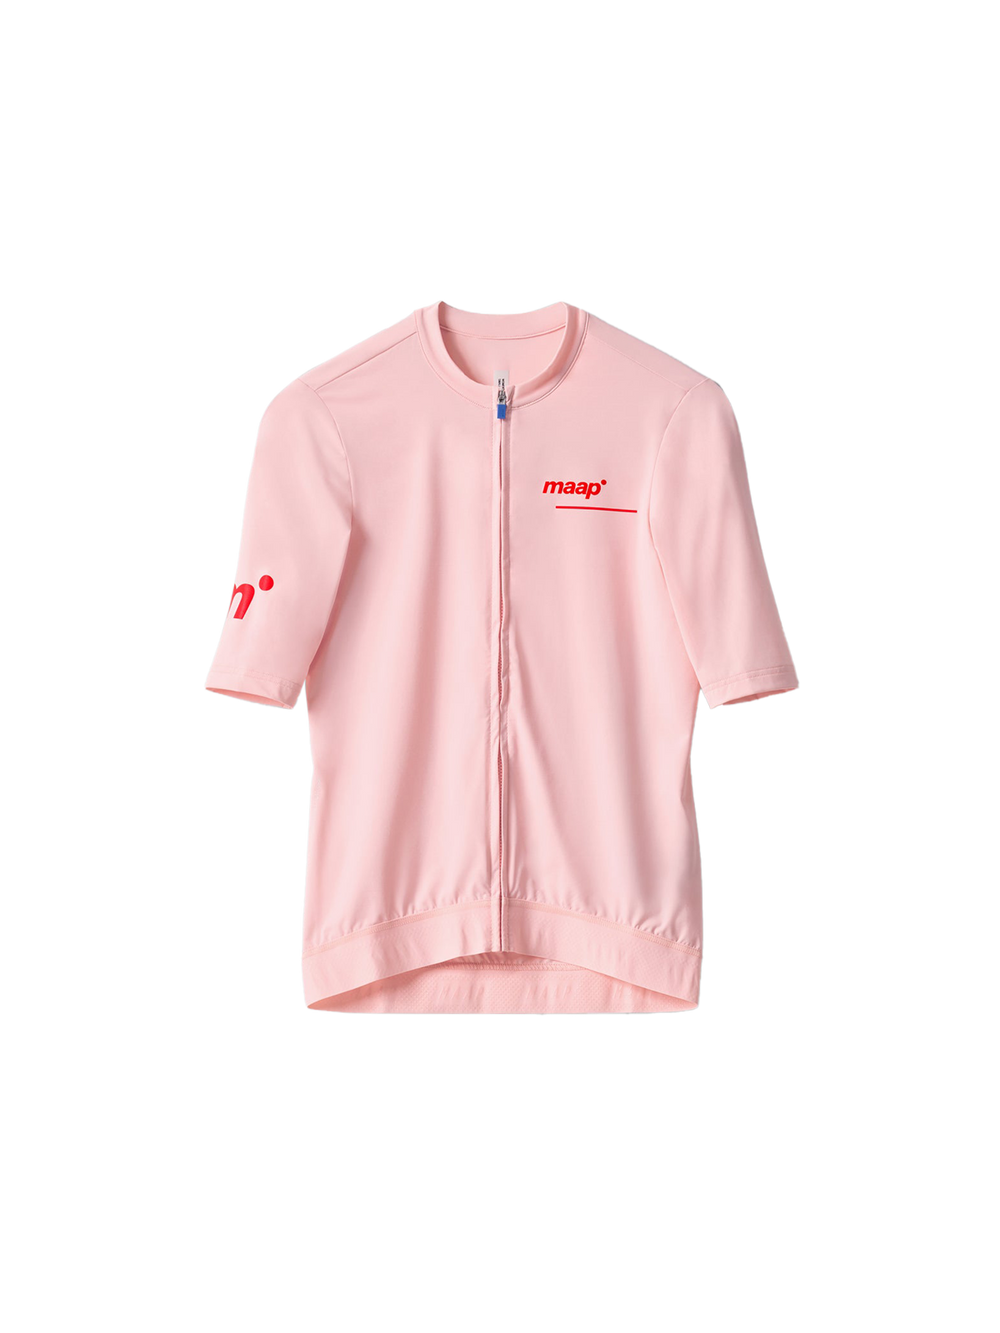 Product Image for Women's Training Jersey